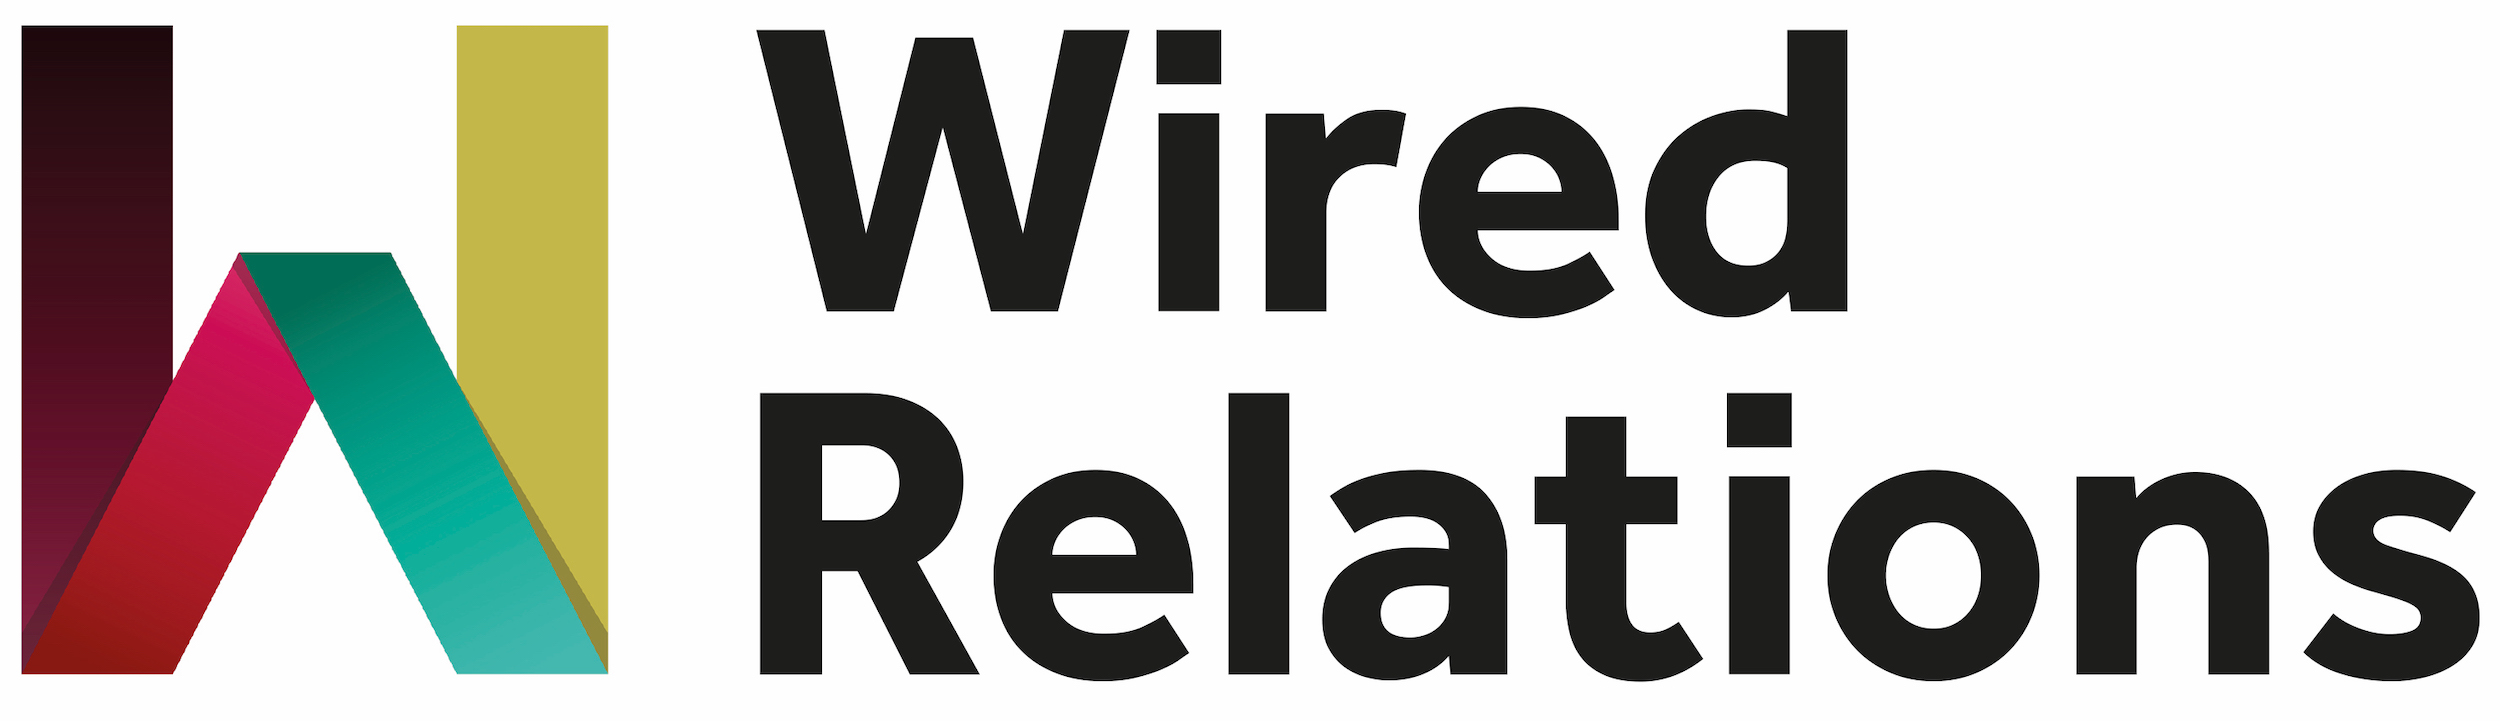 Wired Relations